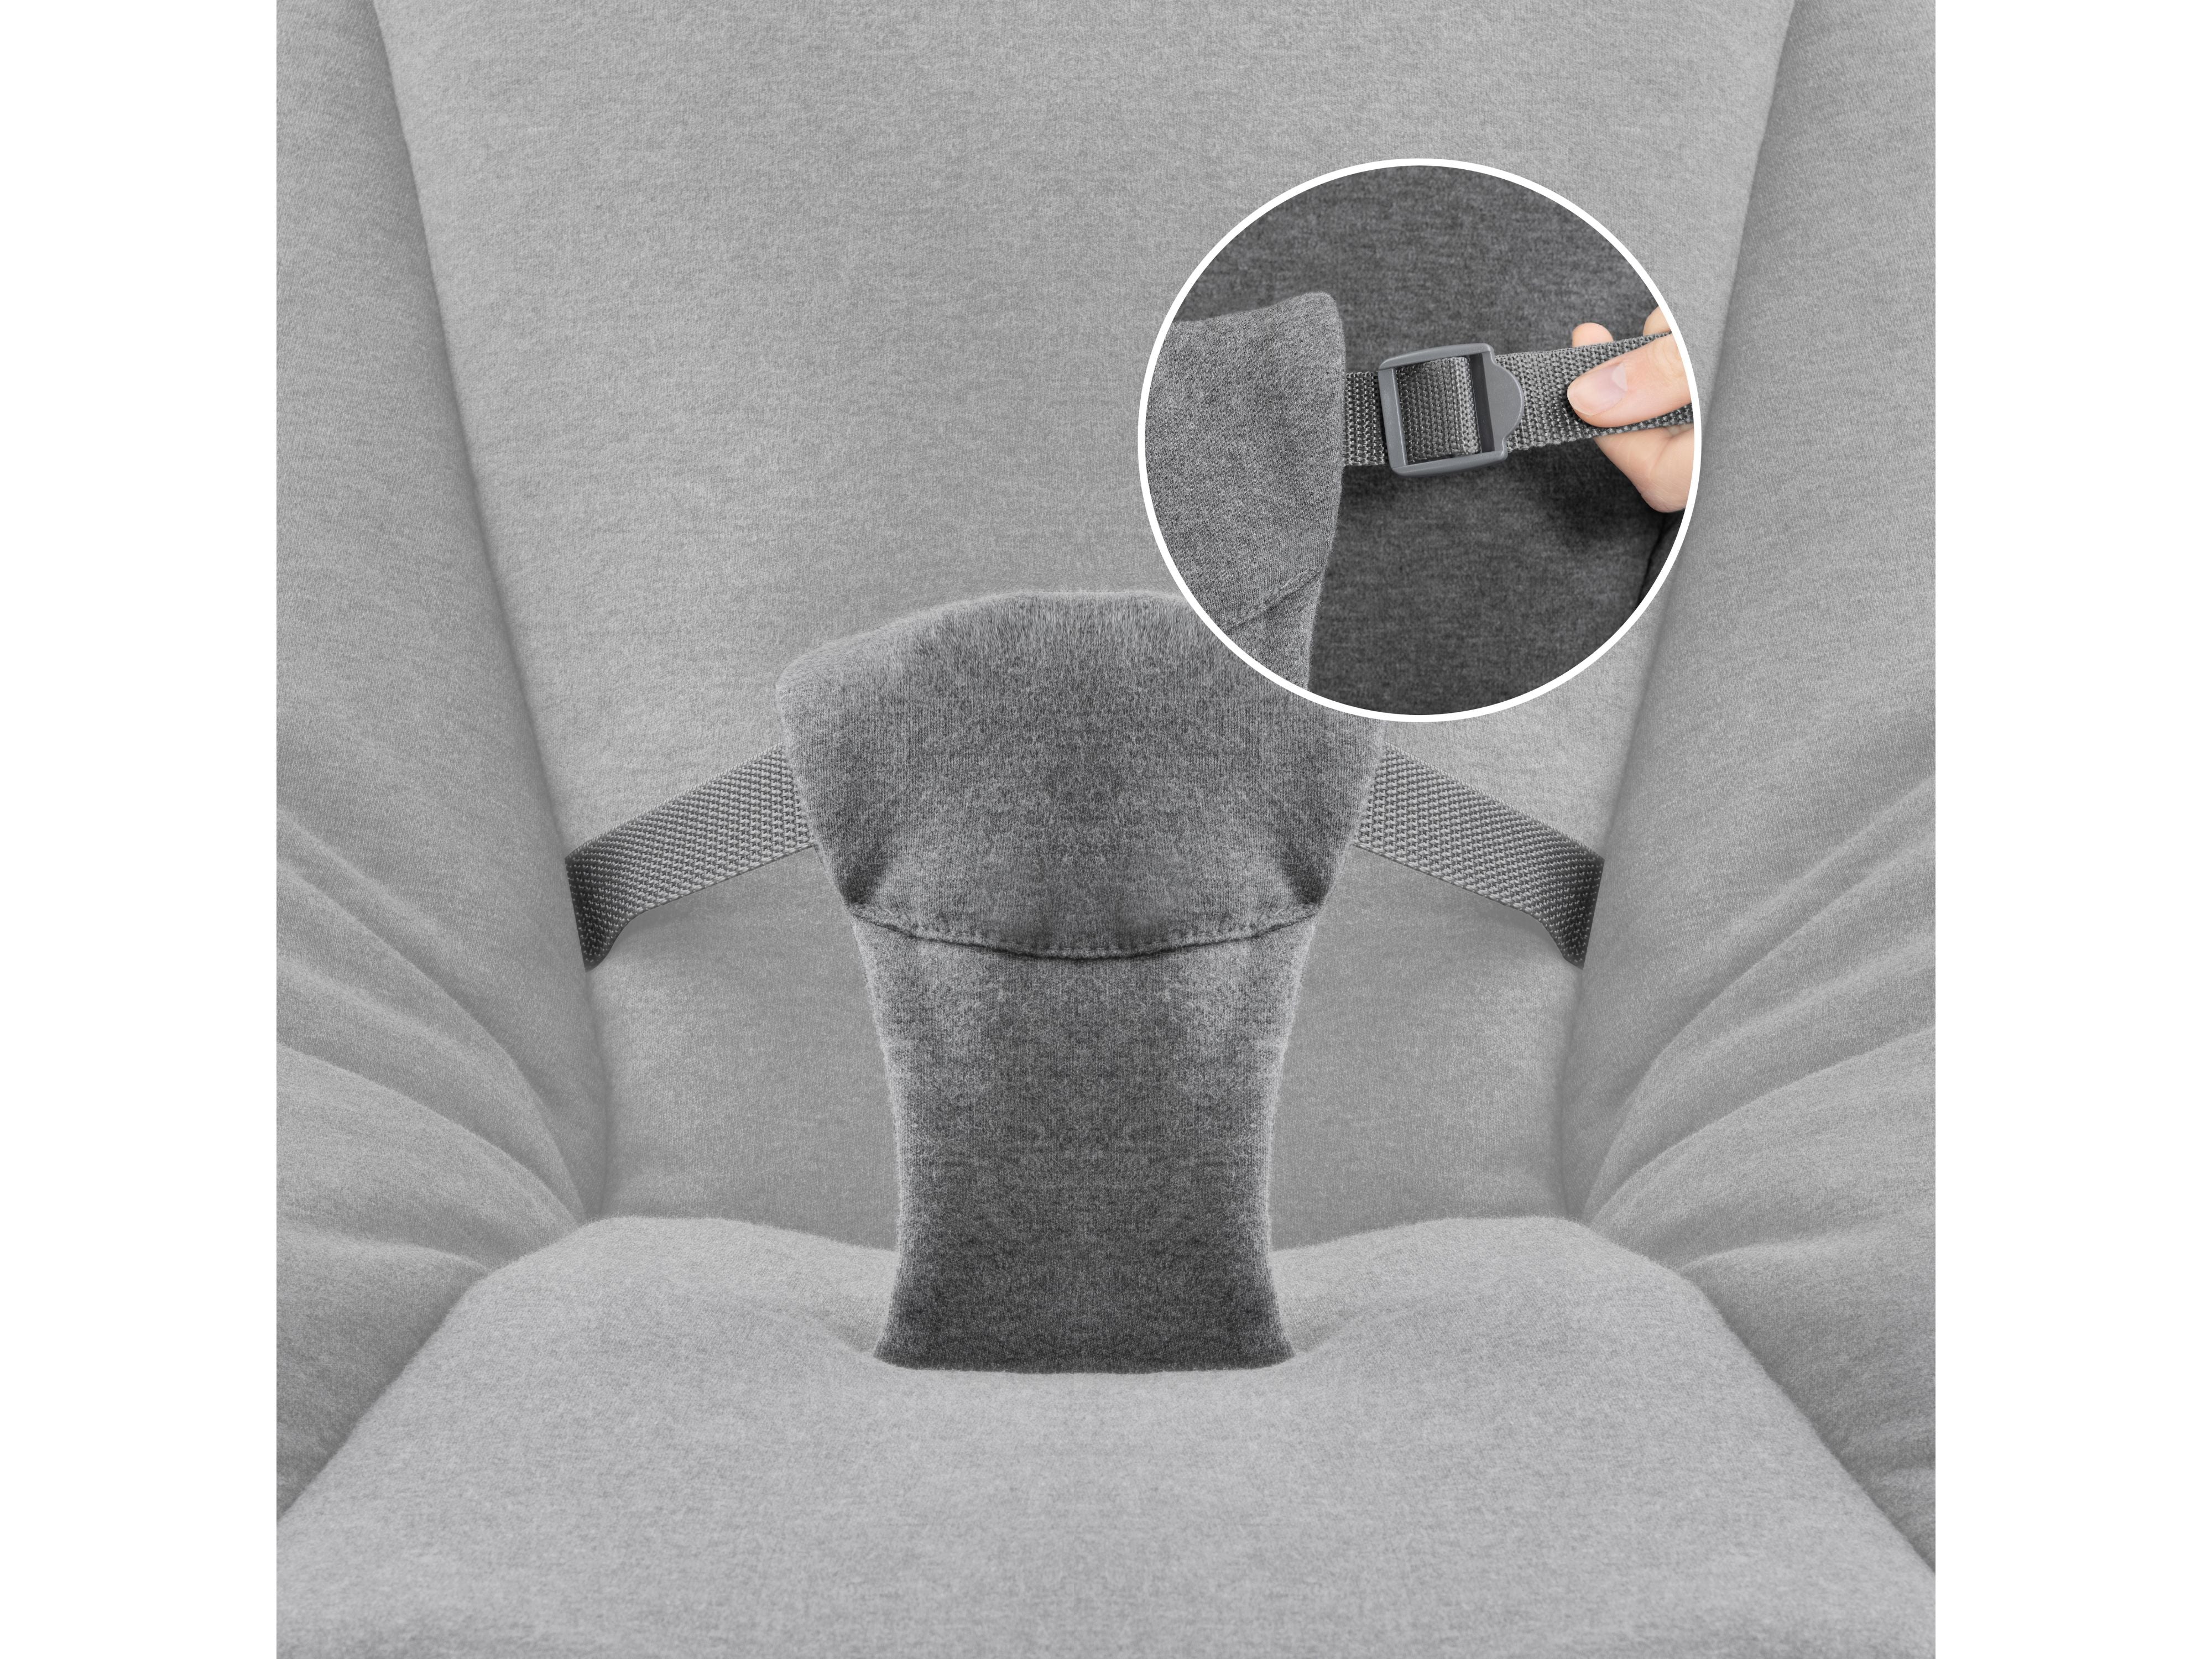 seat buckle for bungee deluxe friend bouncer